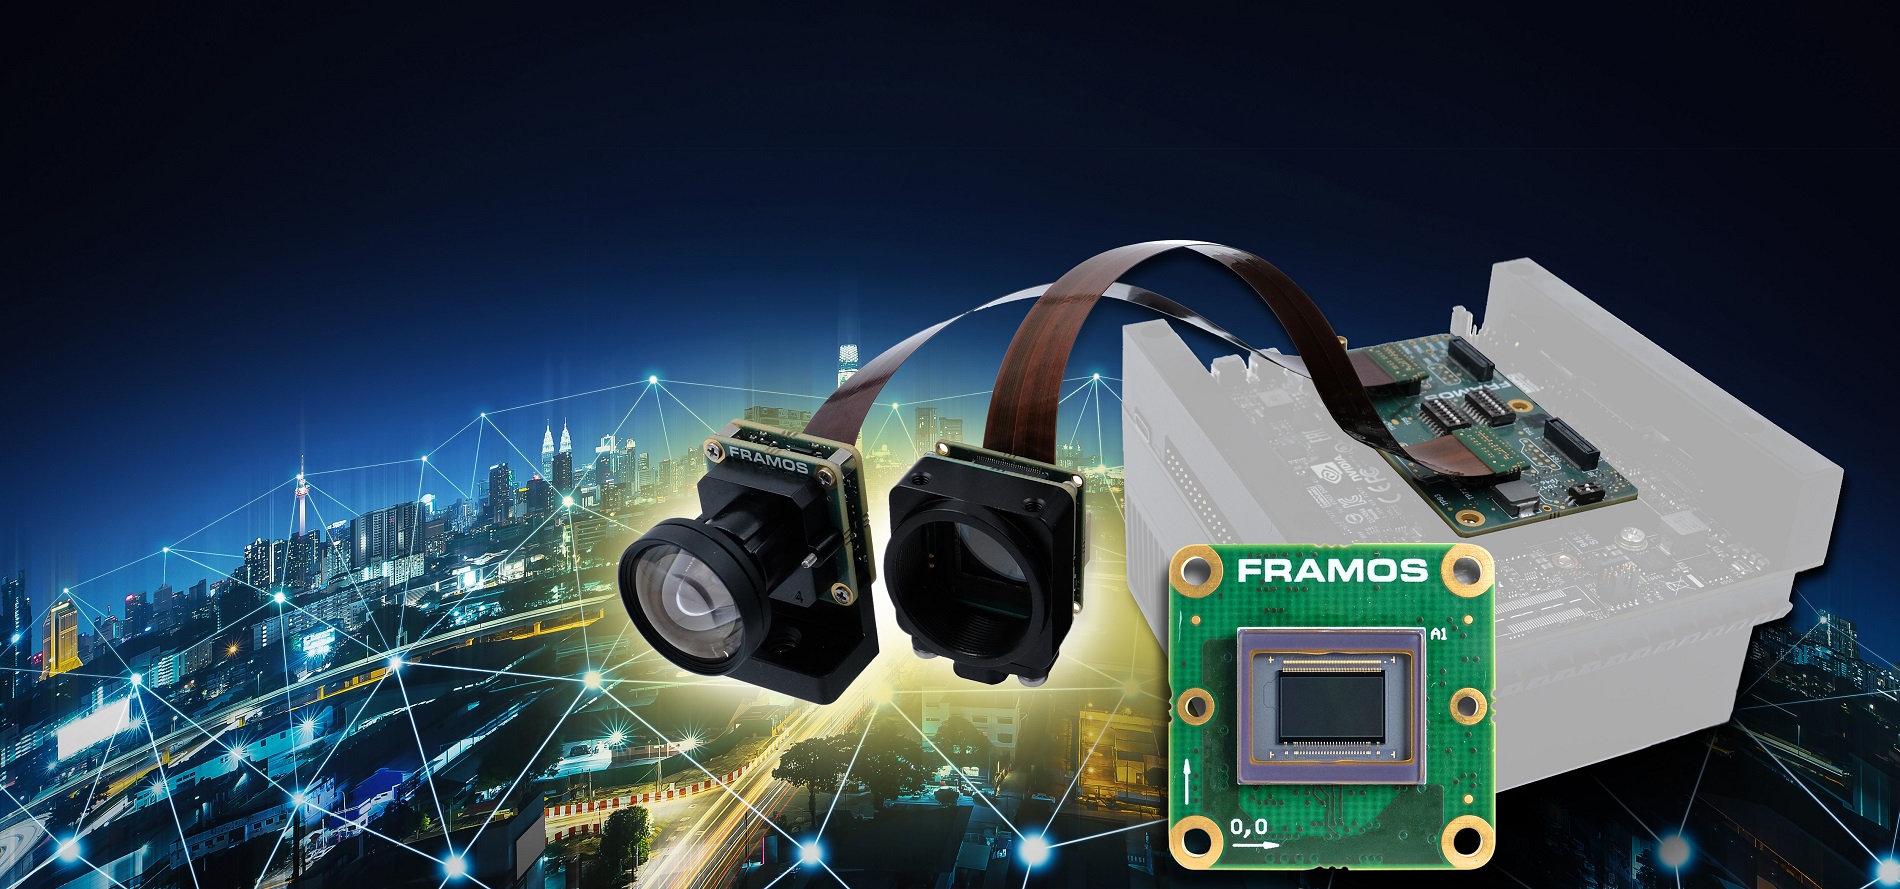 FSM IMX678 from FRAMOS is an excellent choice for Smart City and various low-light applications